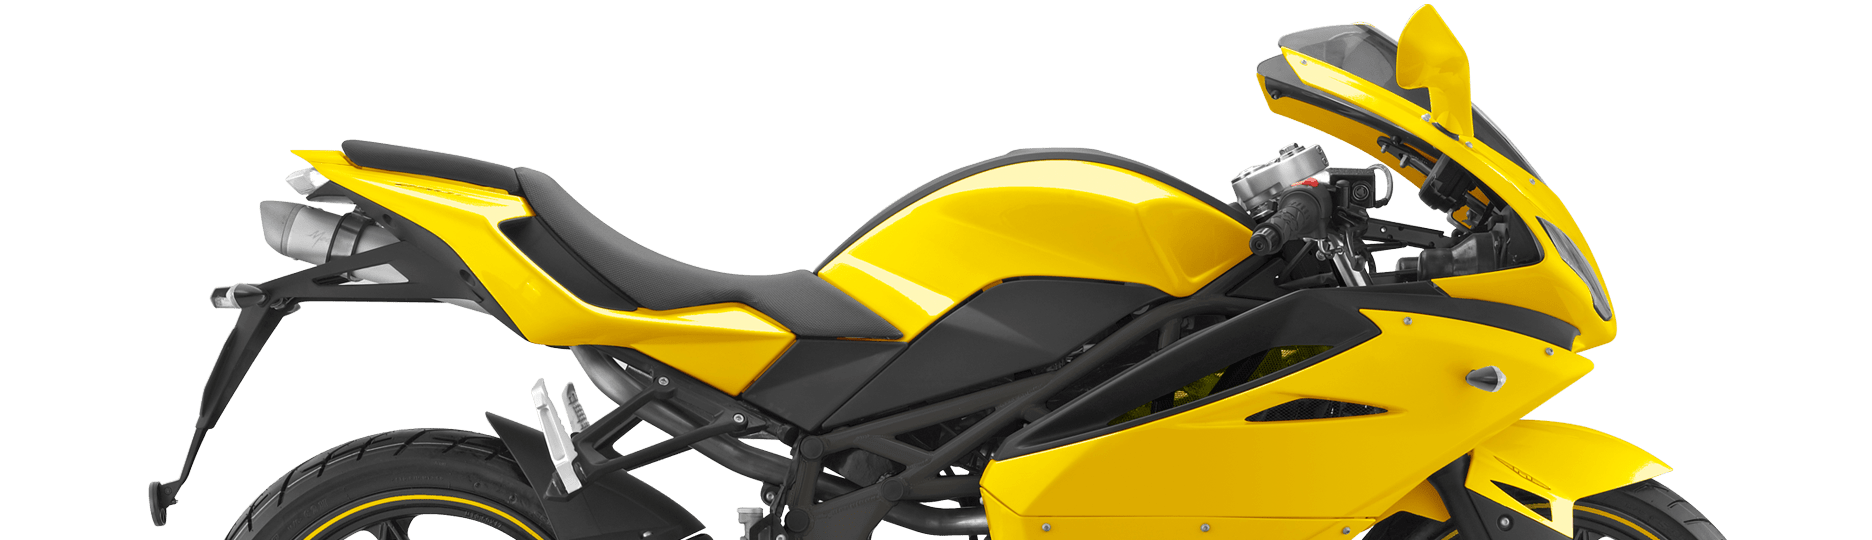 motorcycle styling design